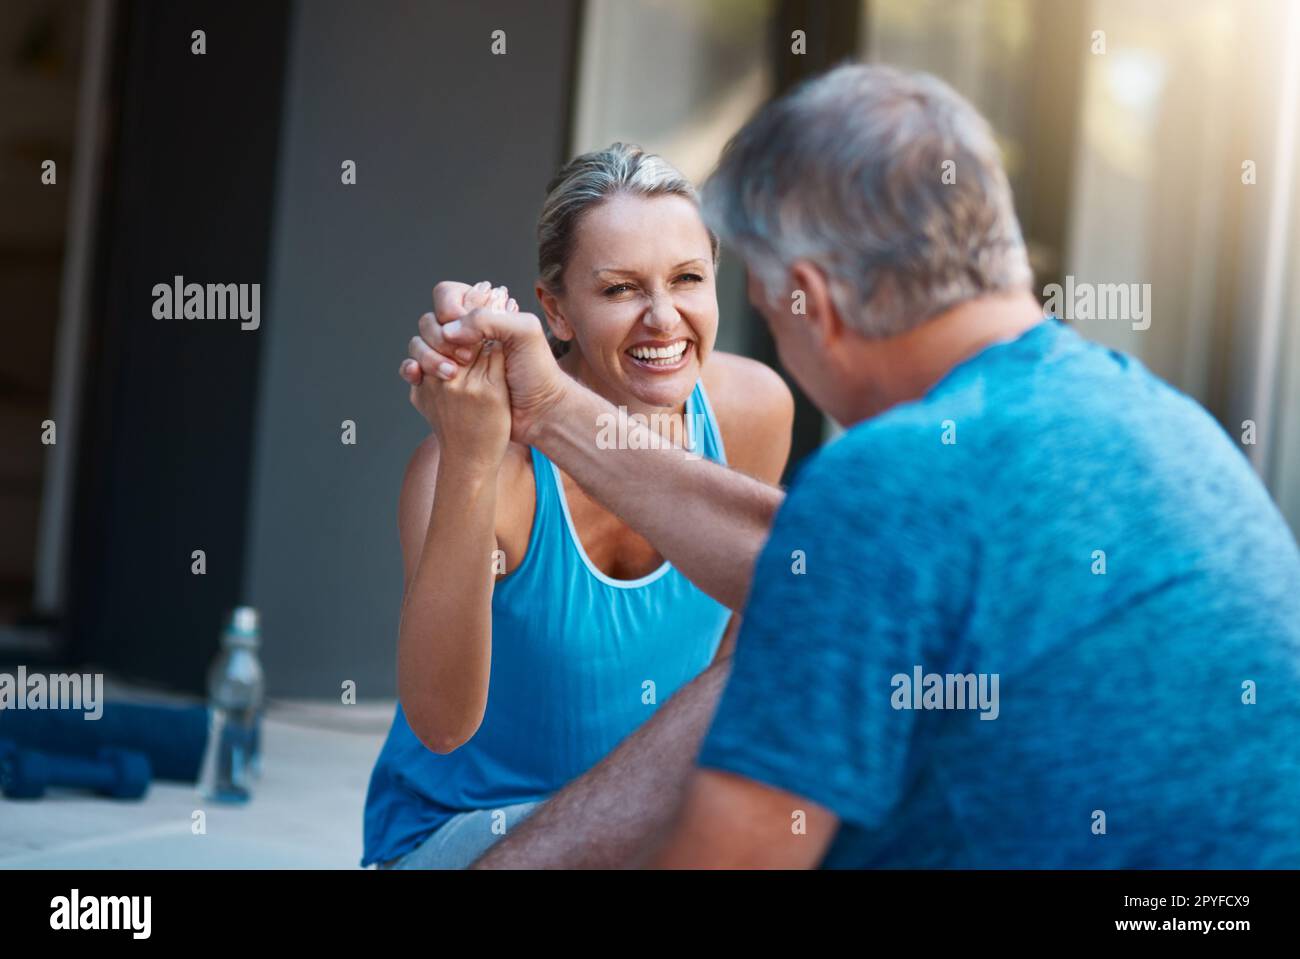 Teamwork makes the dream work. a mature and motivated couple congratulating each other at the end of an intense workout session. Stock Photo